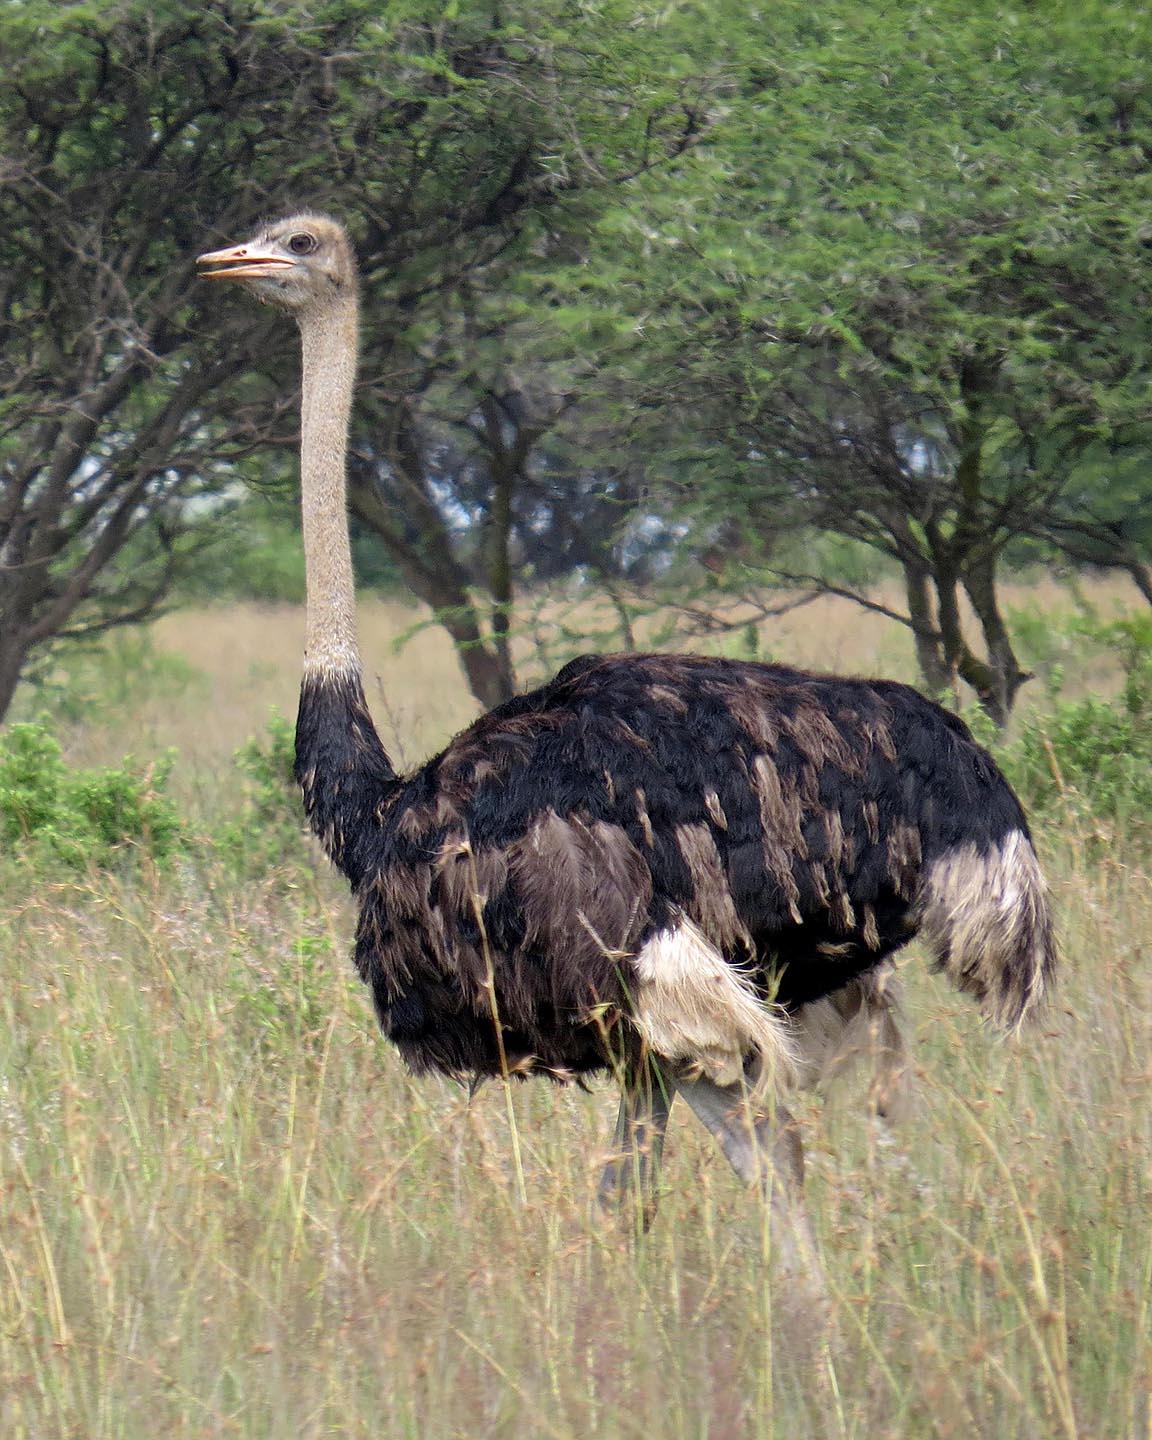 Common Ostrich Photo by Peter Boesman